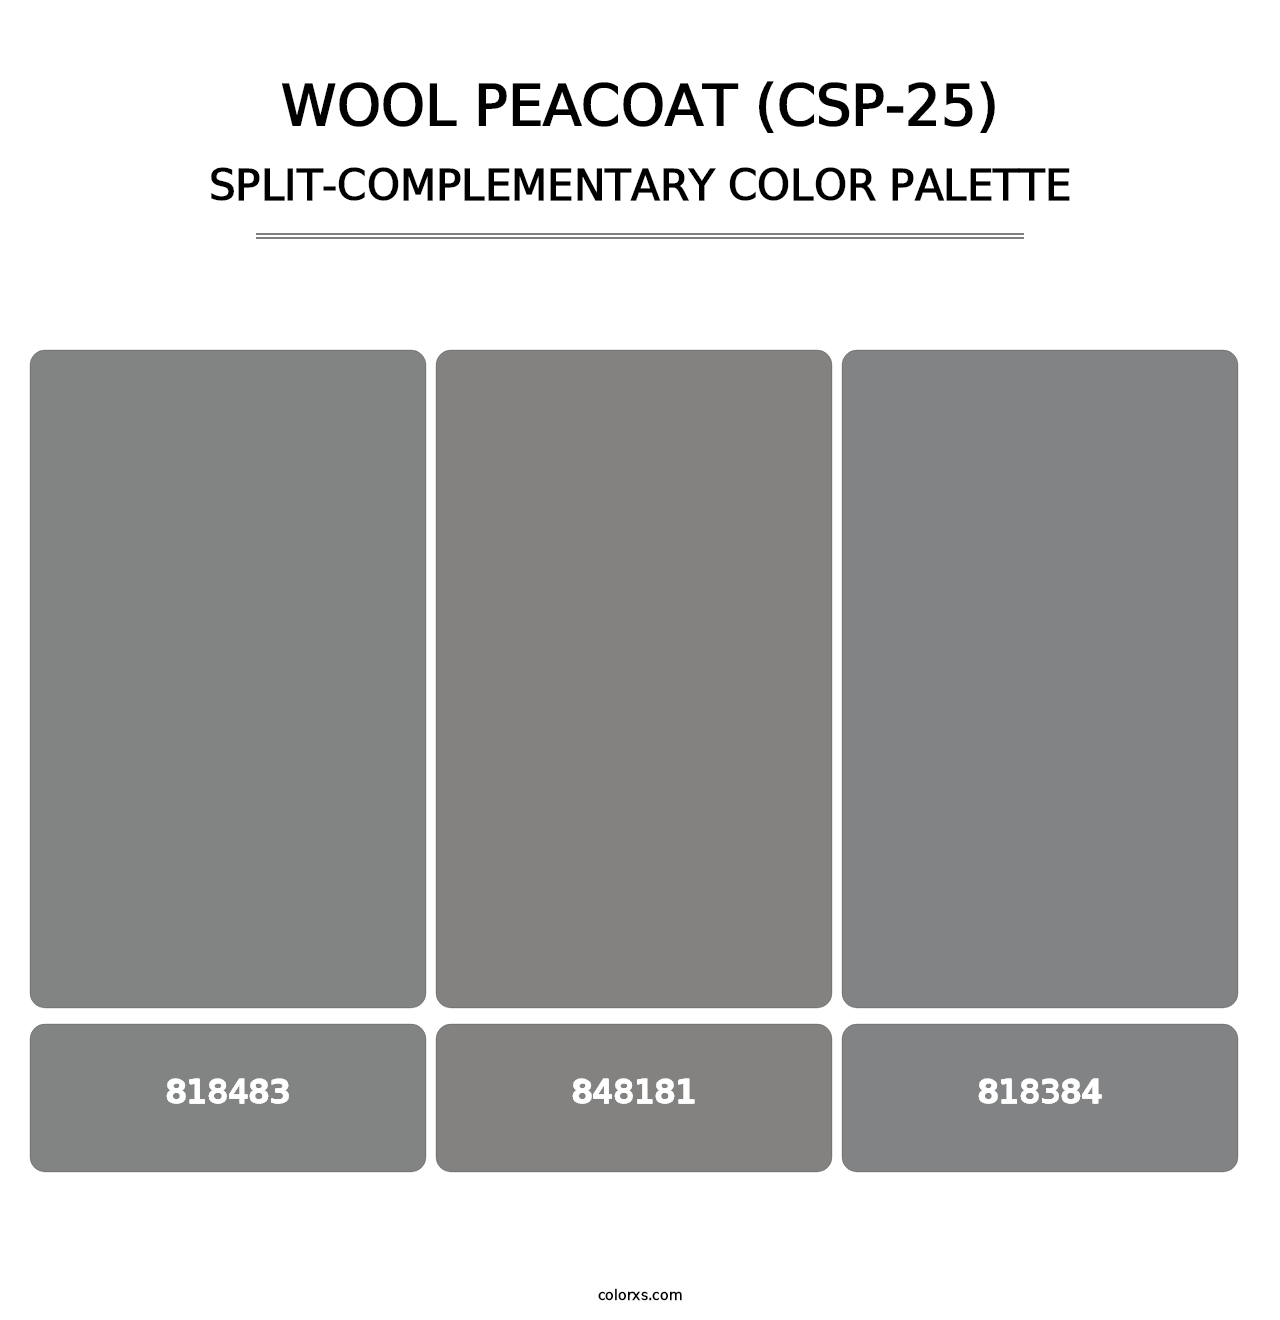 Wool Peacoat (CSP-25) - Split-Complementary Color Palette